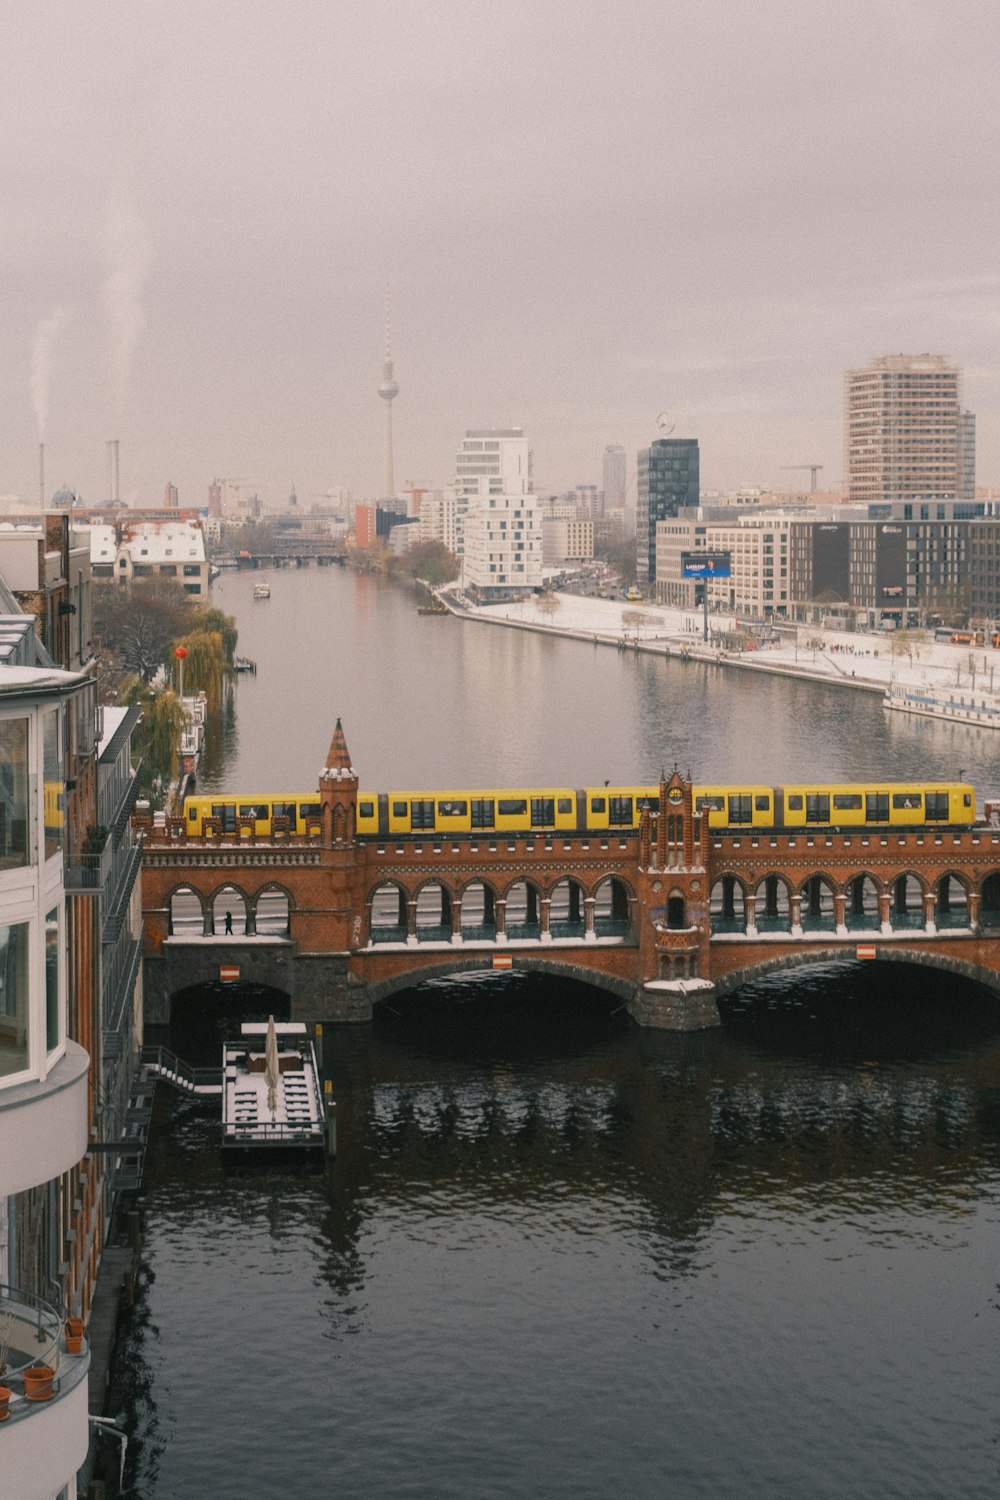 a train on a bridge over a body of water